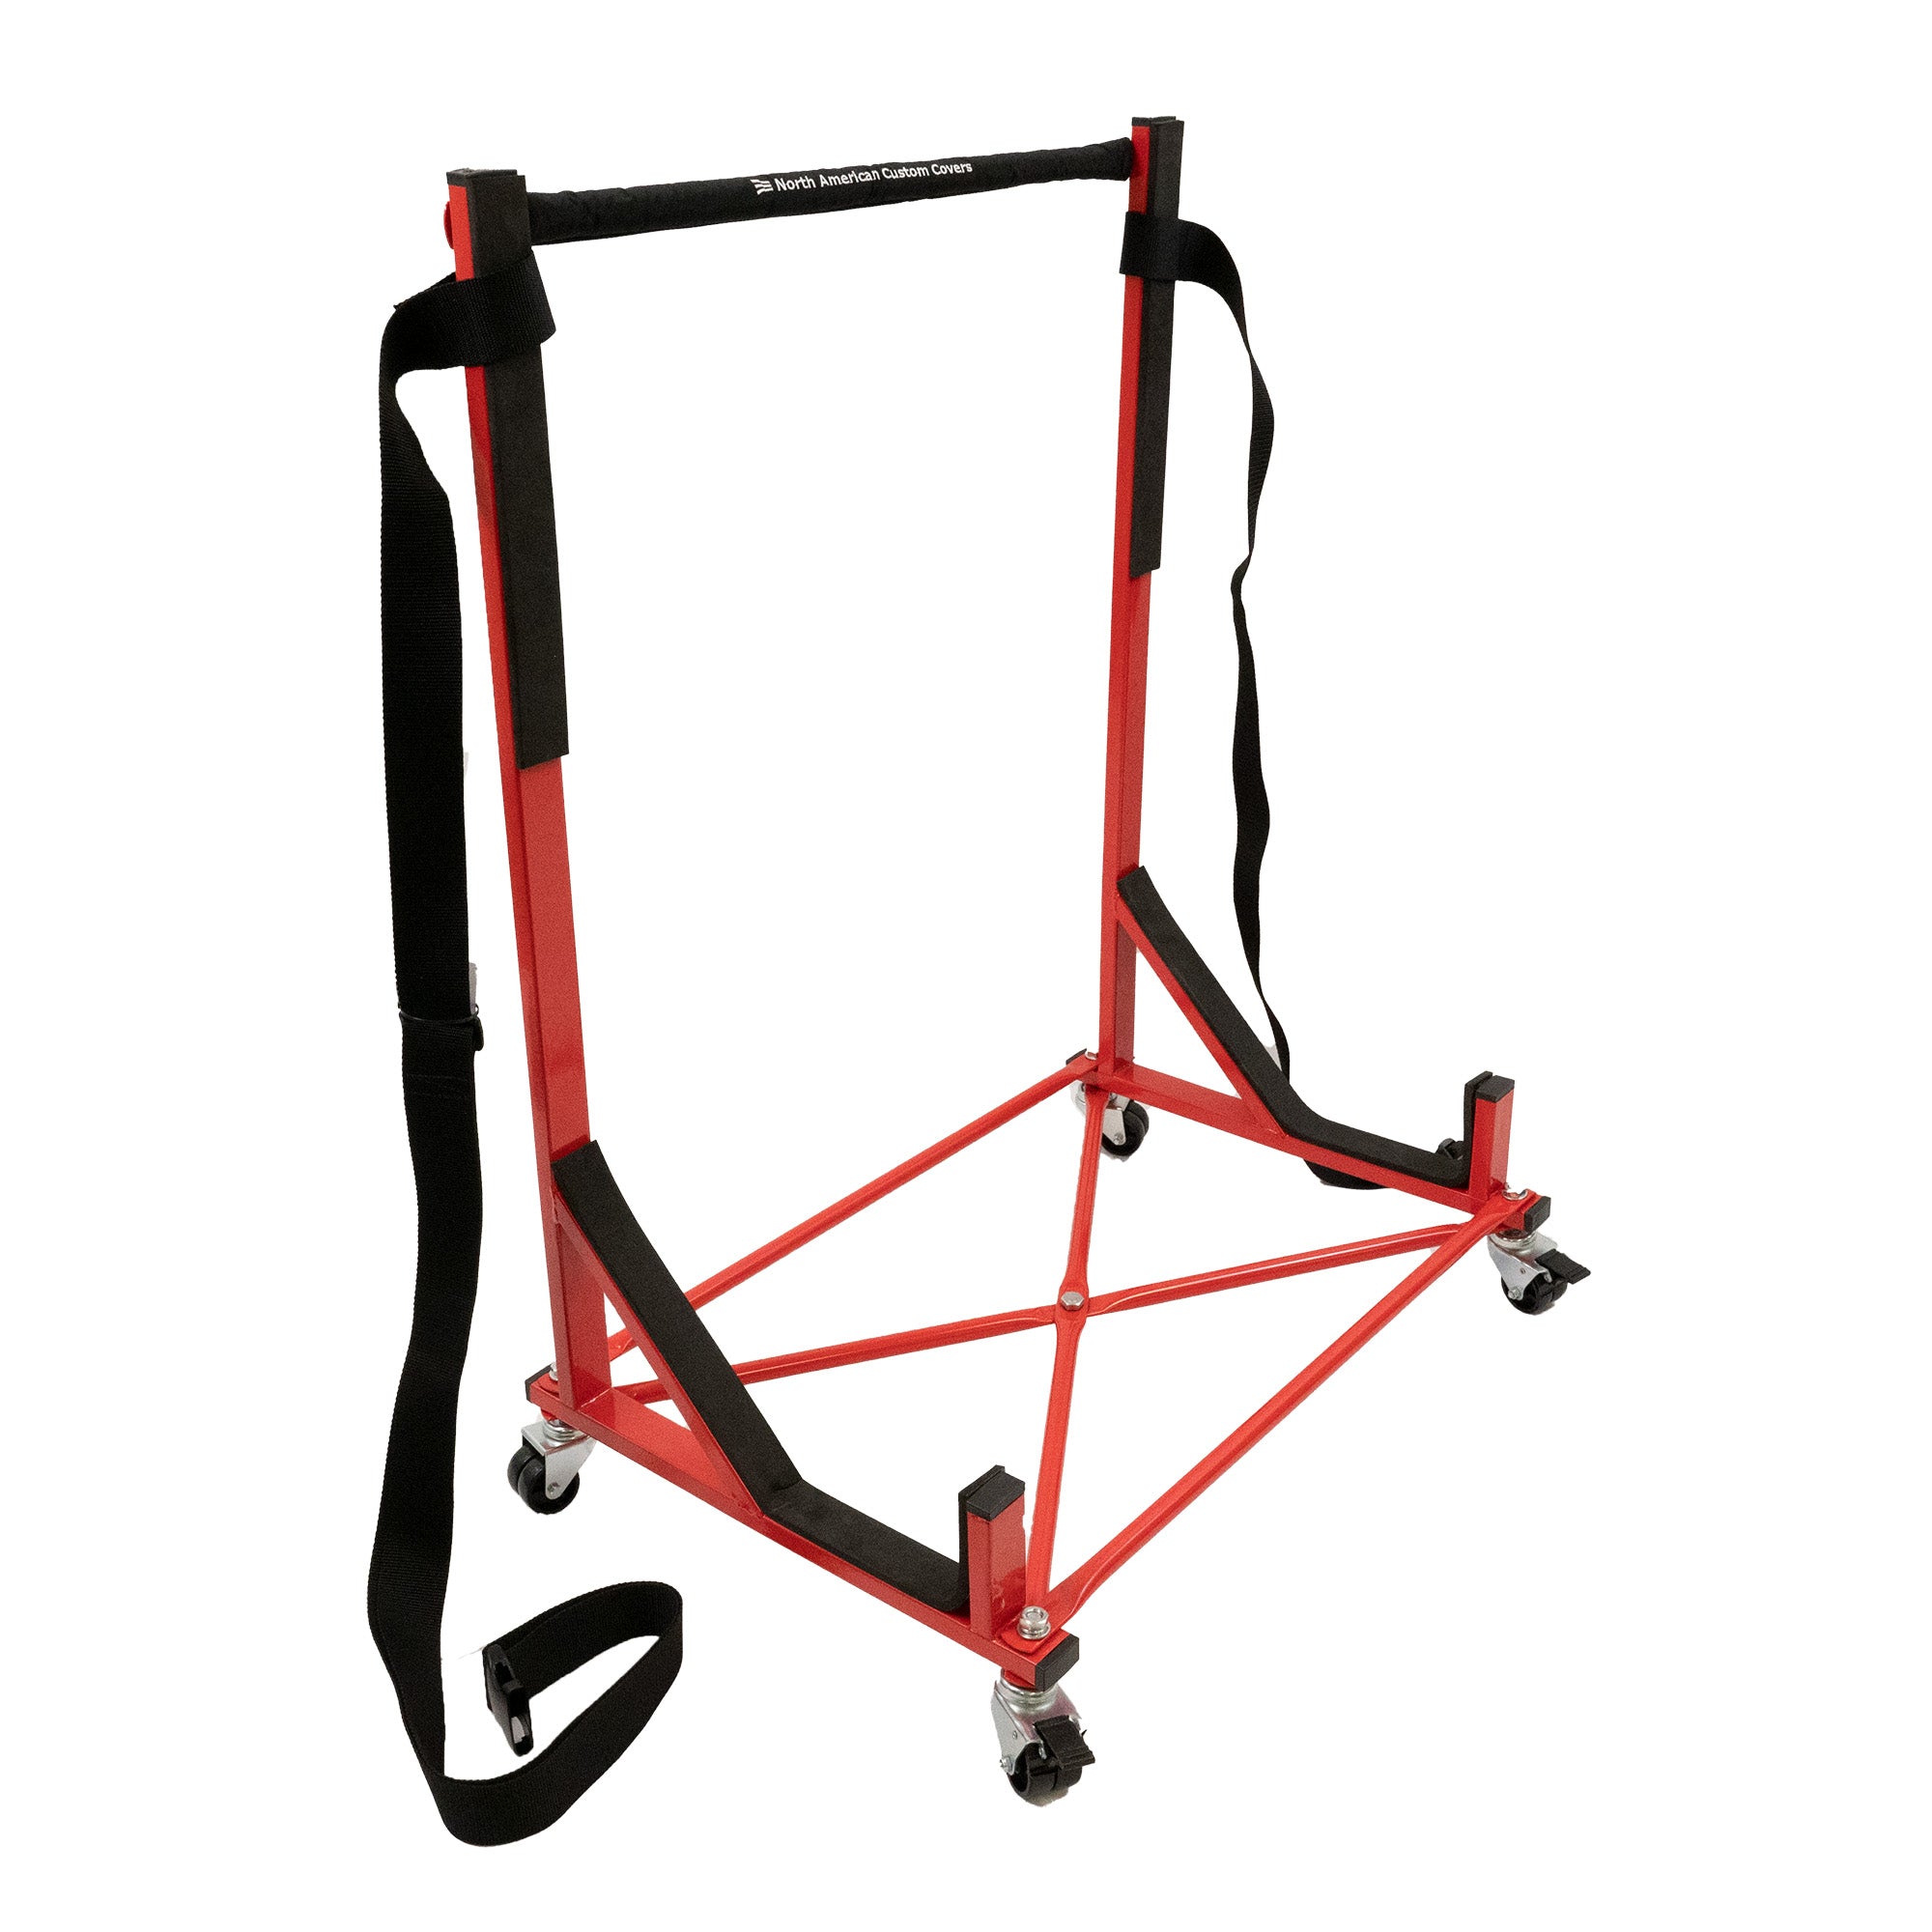 Triumph Stag Heavy-duty Hardtop Stand Trolley Cart Rack (Red) with Securing Harness and Hard Top Dust Cover (050R)